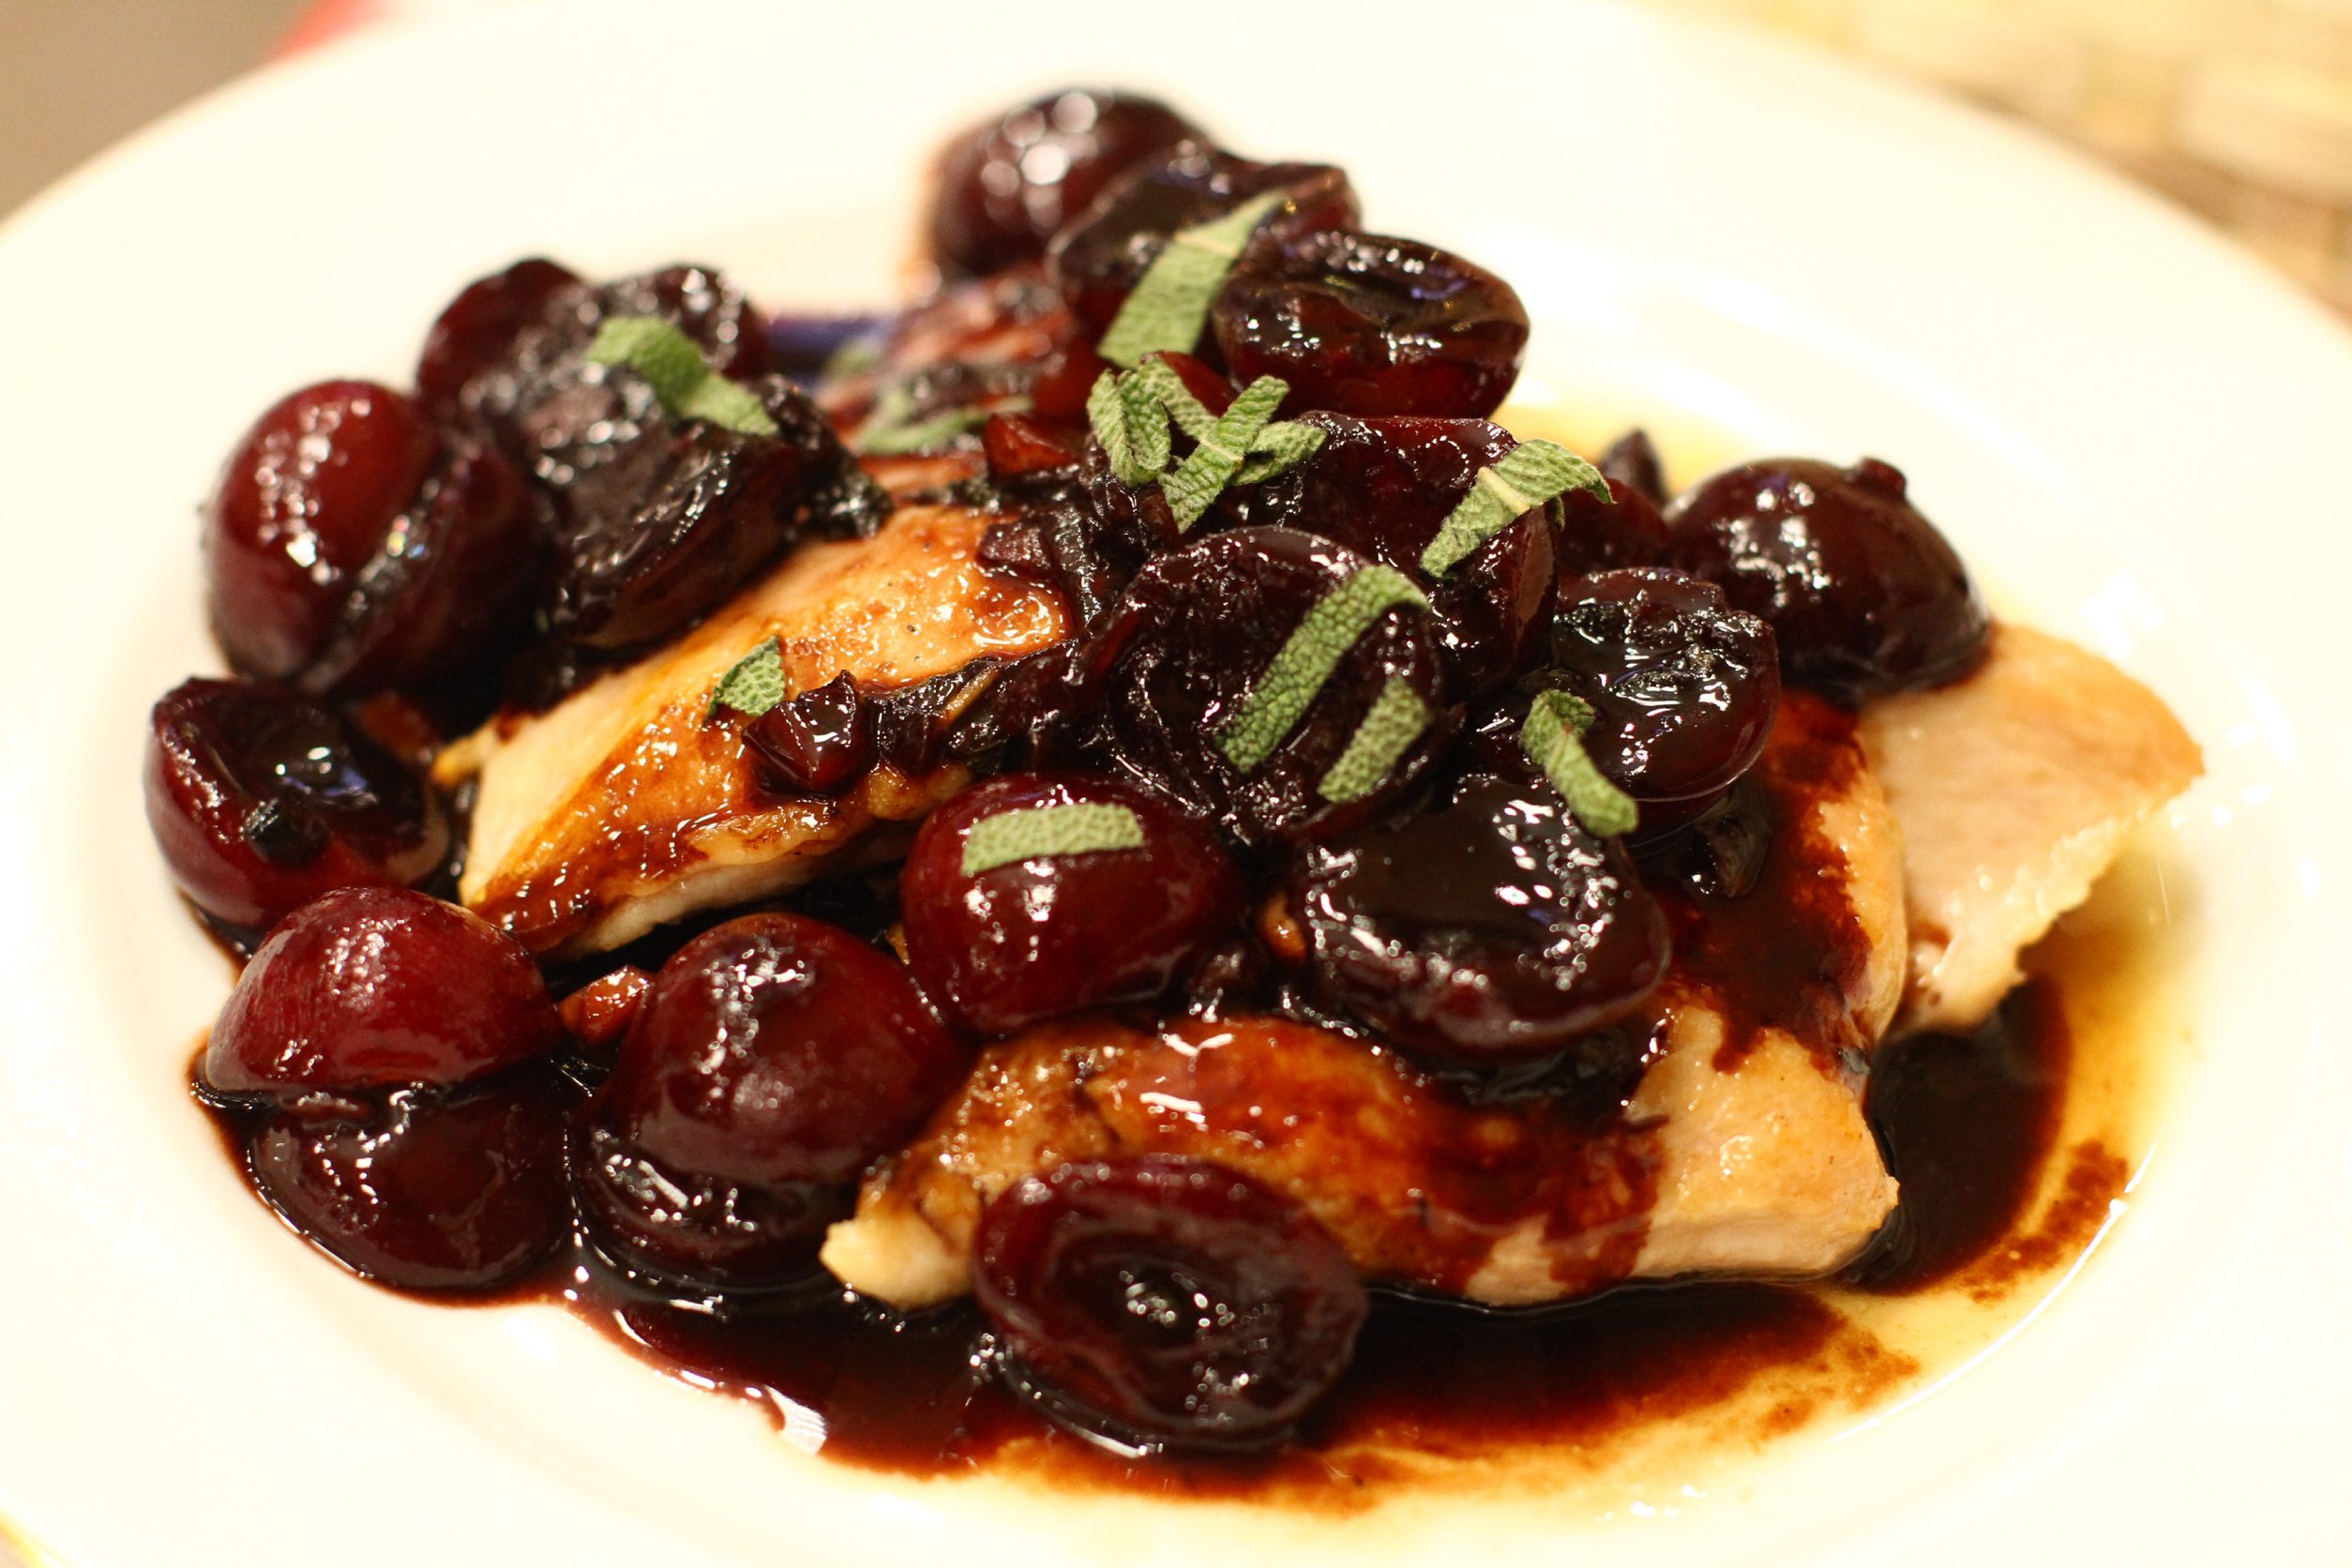 Cherry Pan-seared Chicken Breast with Cherry Balsamic Sauce